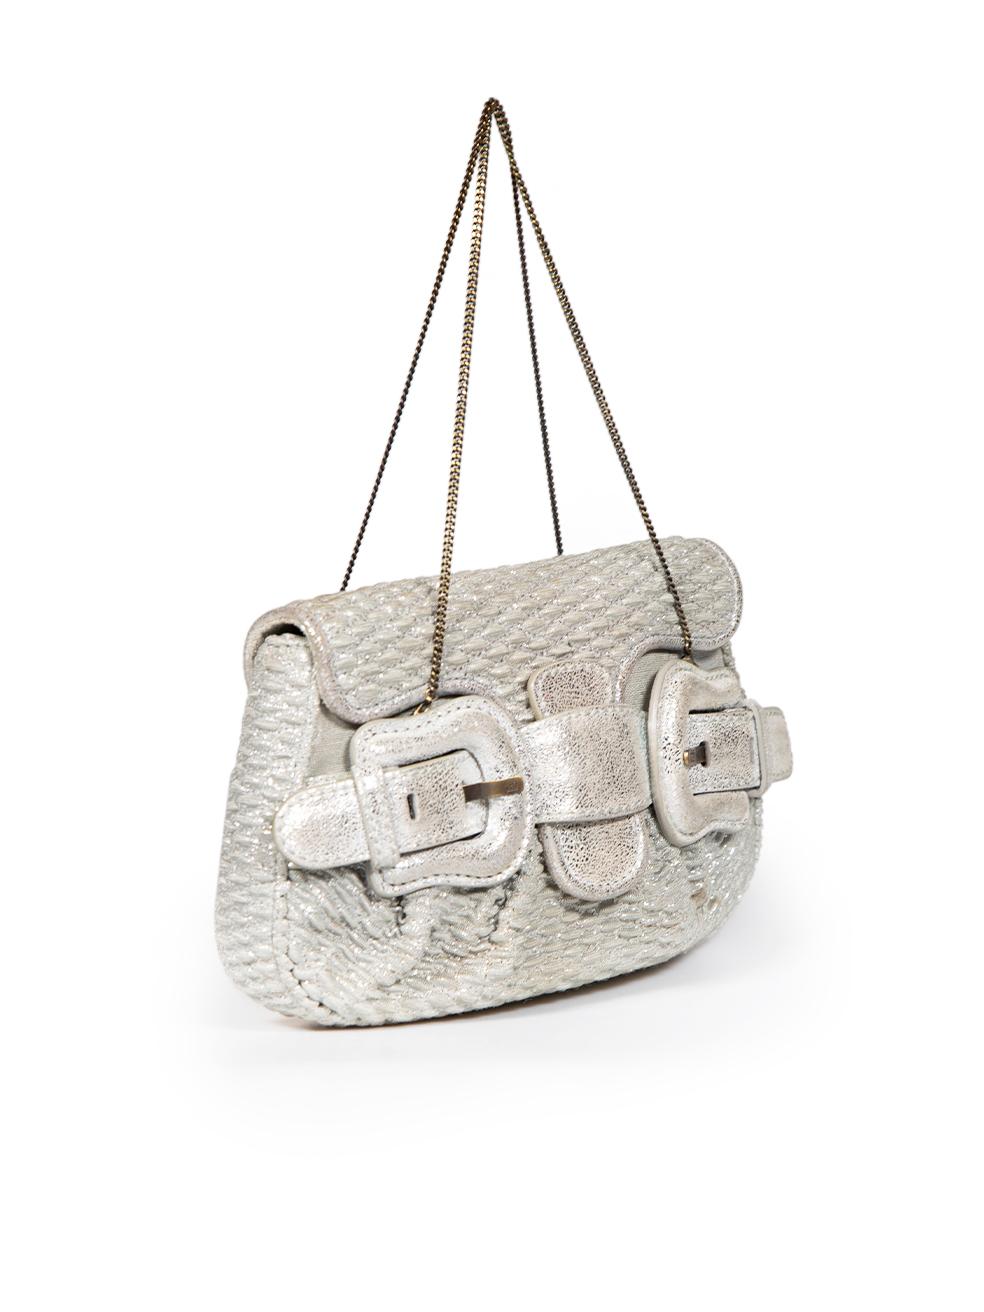 CONDITION is Good. General wear to bag is evident. Moderate signs of wear to the front, back and lining with discolouration and marks on this used Fendi designer resale item.
 
 
 
 Details
 
 
 Model: B Bag
 
 Silver
 
 Textured cloth
 
 Mini